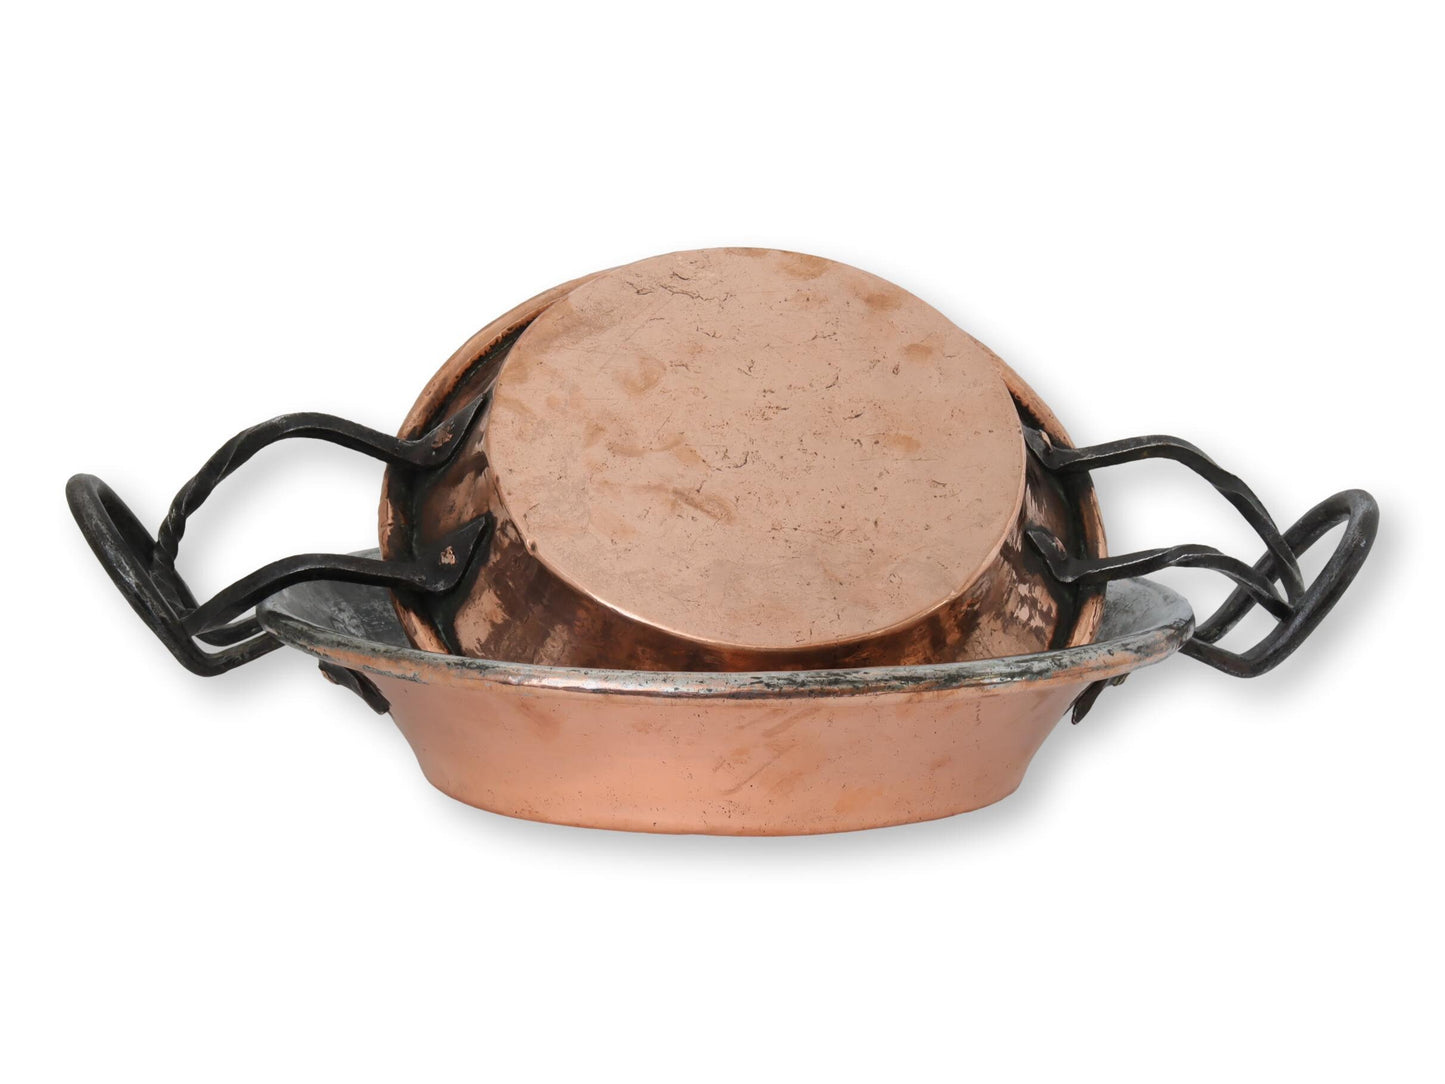 19th-Century English Copper Pie Dishes, Pair